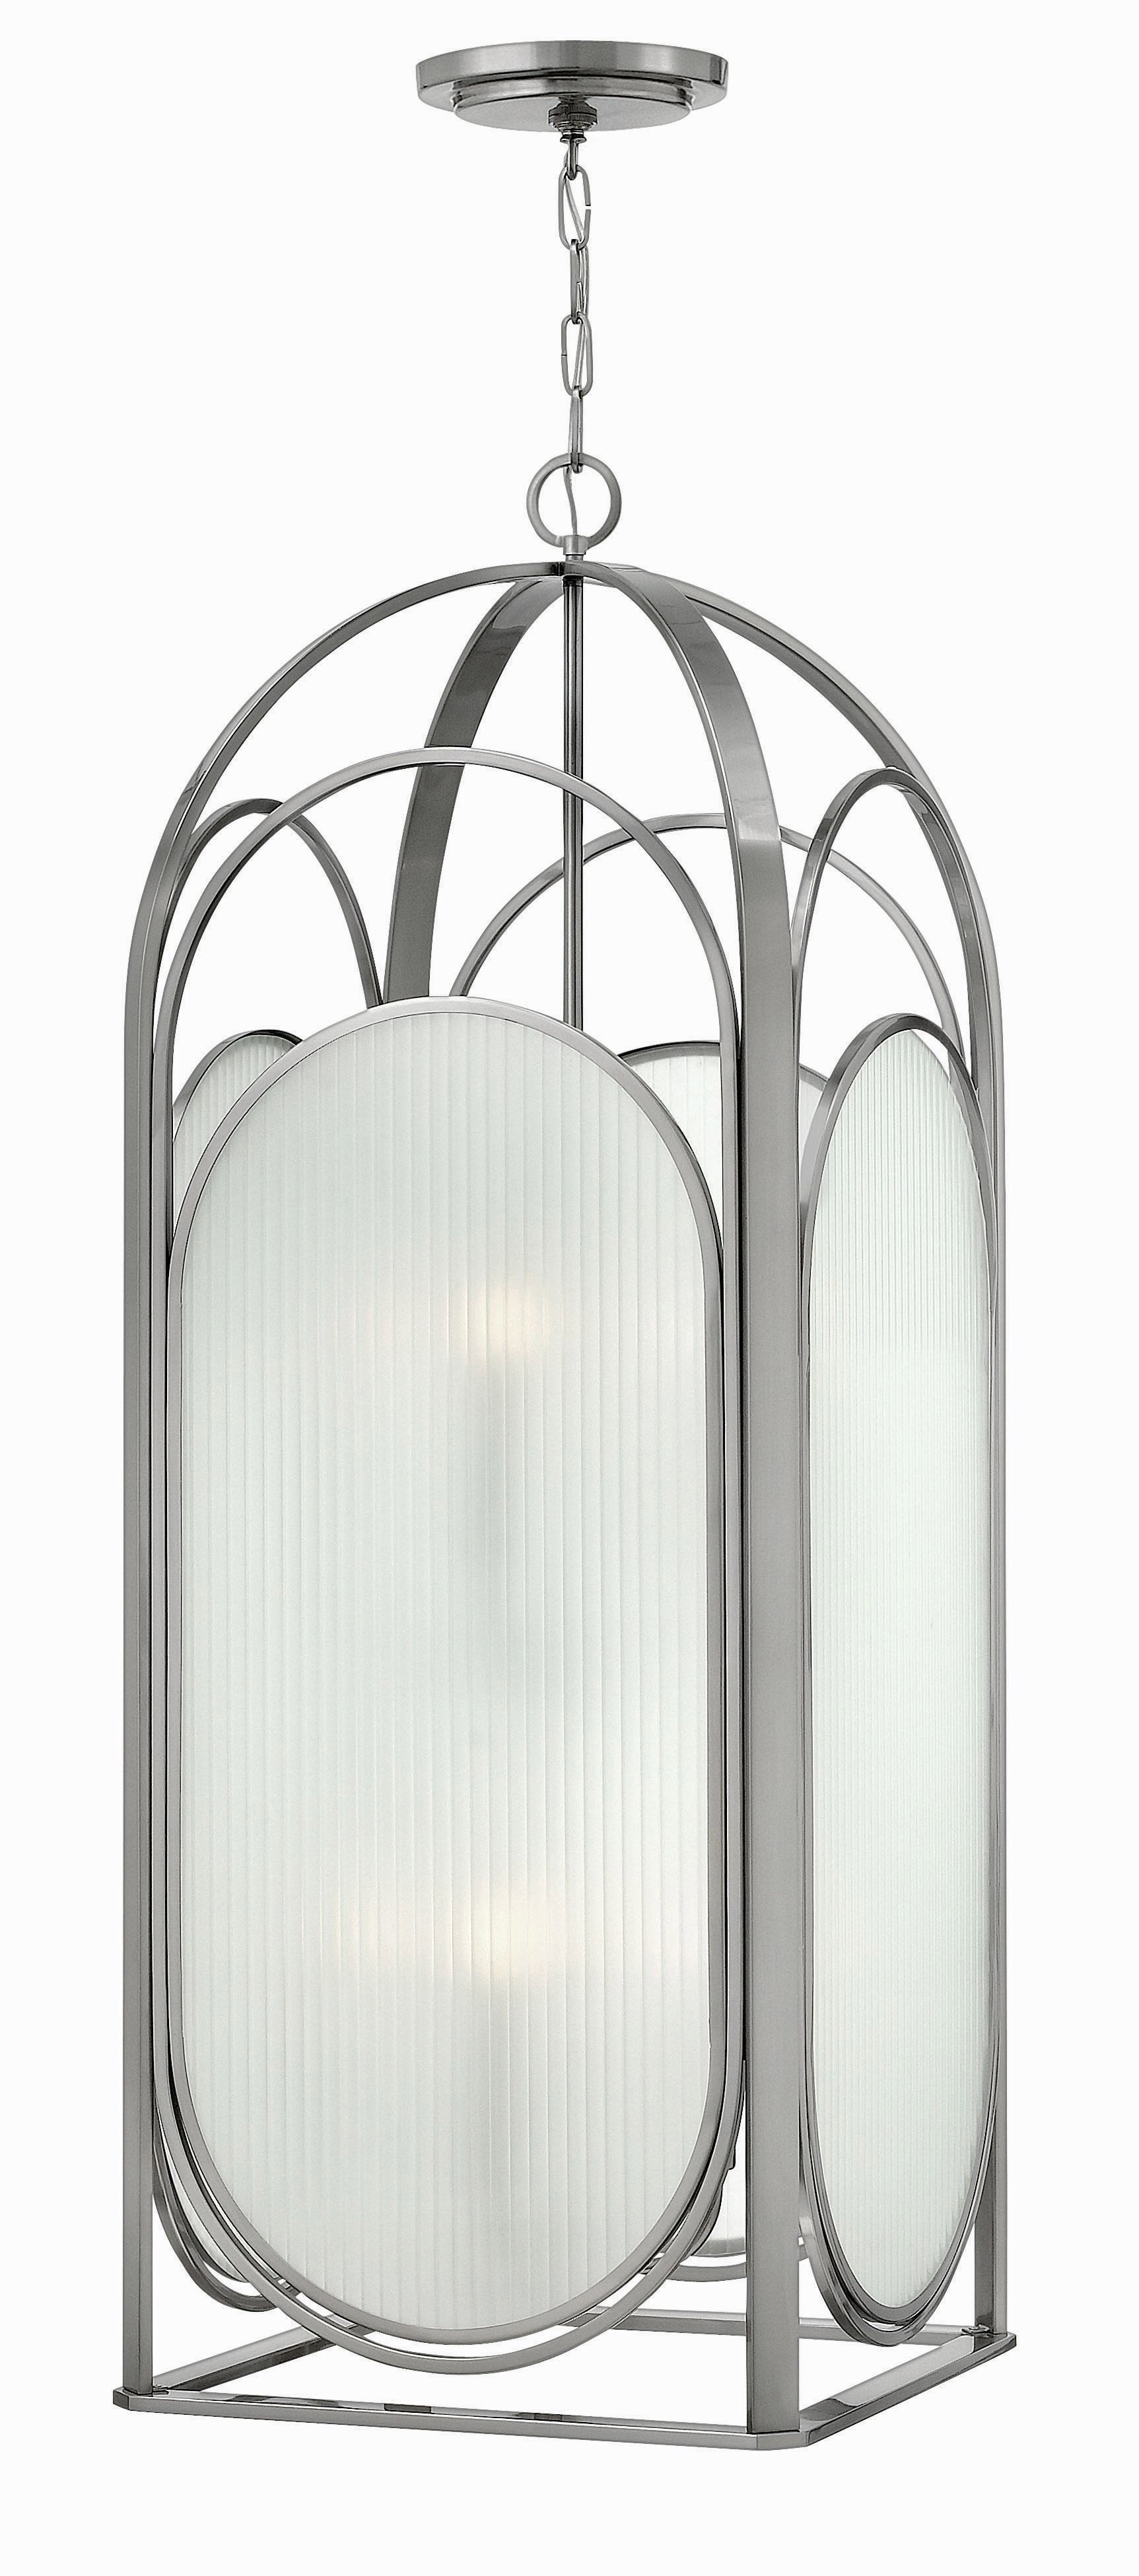 Hinkley Lighting-3886BN-Astor - Eight Light Foyer   Brushed Nickel Finish with Ribbed Etched Glass